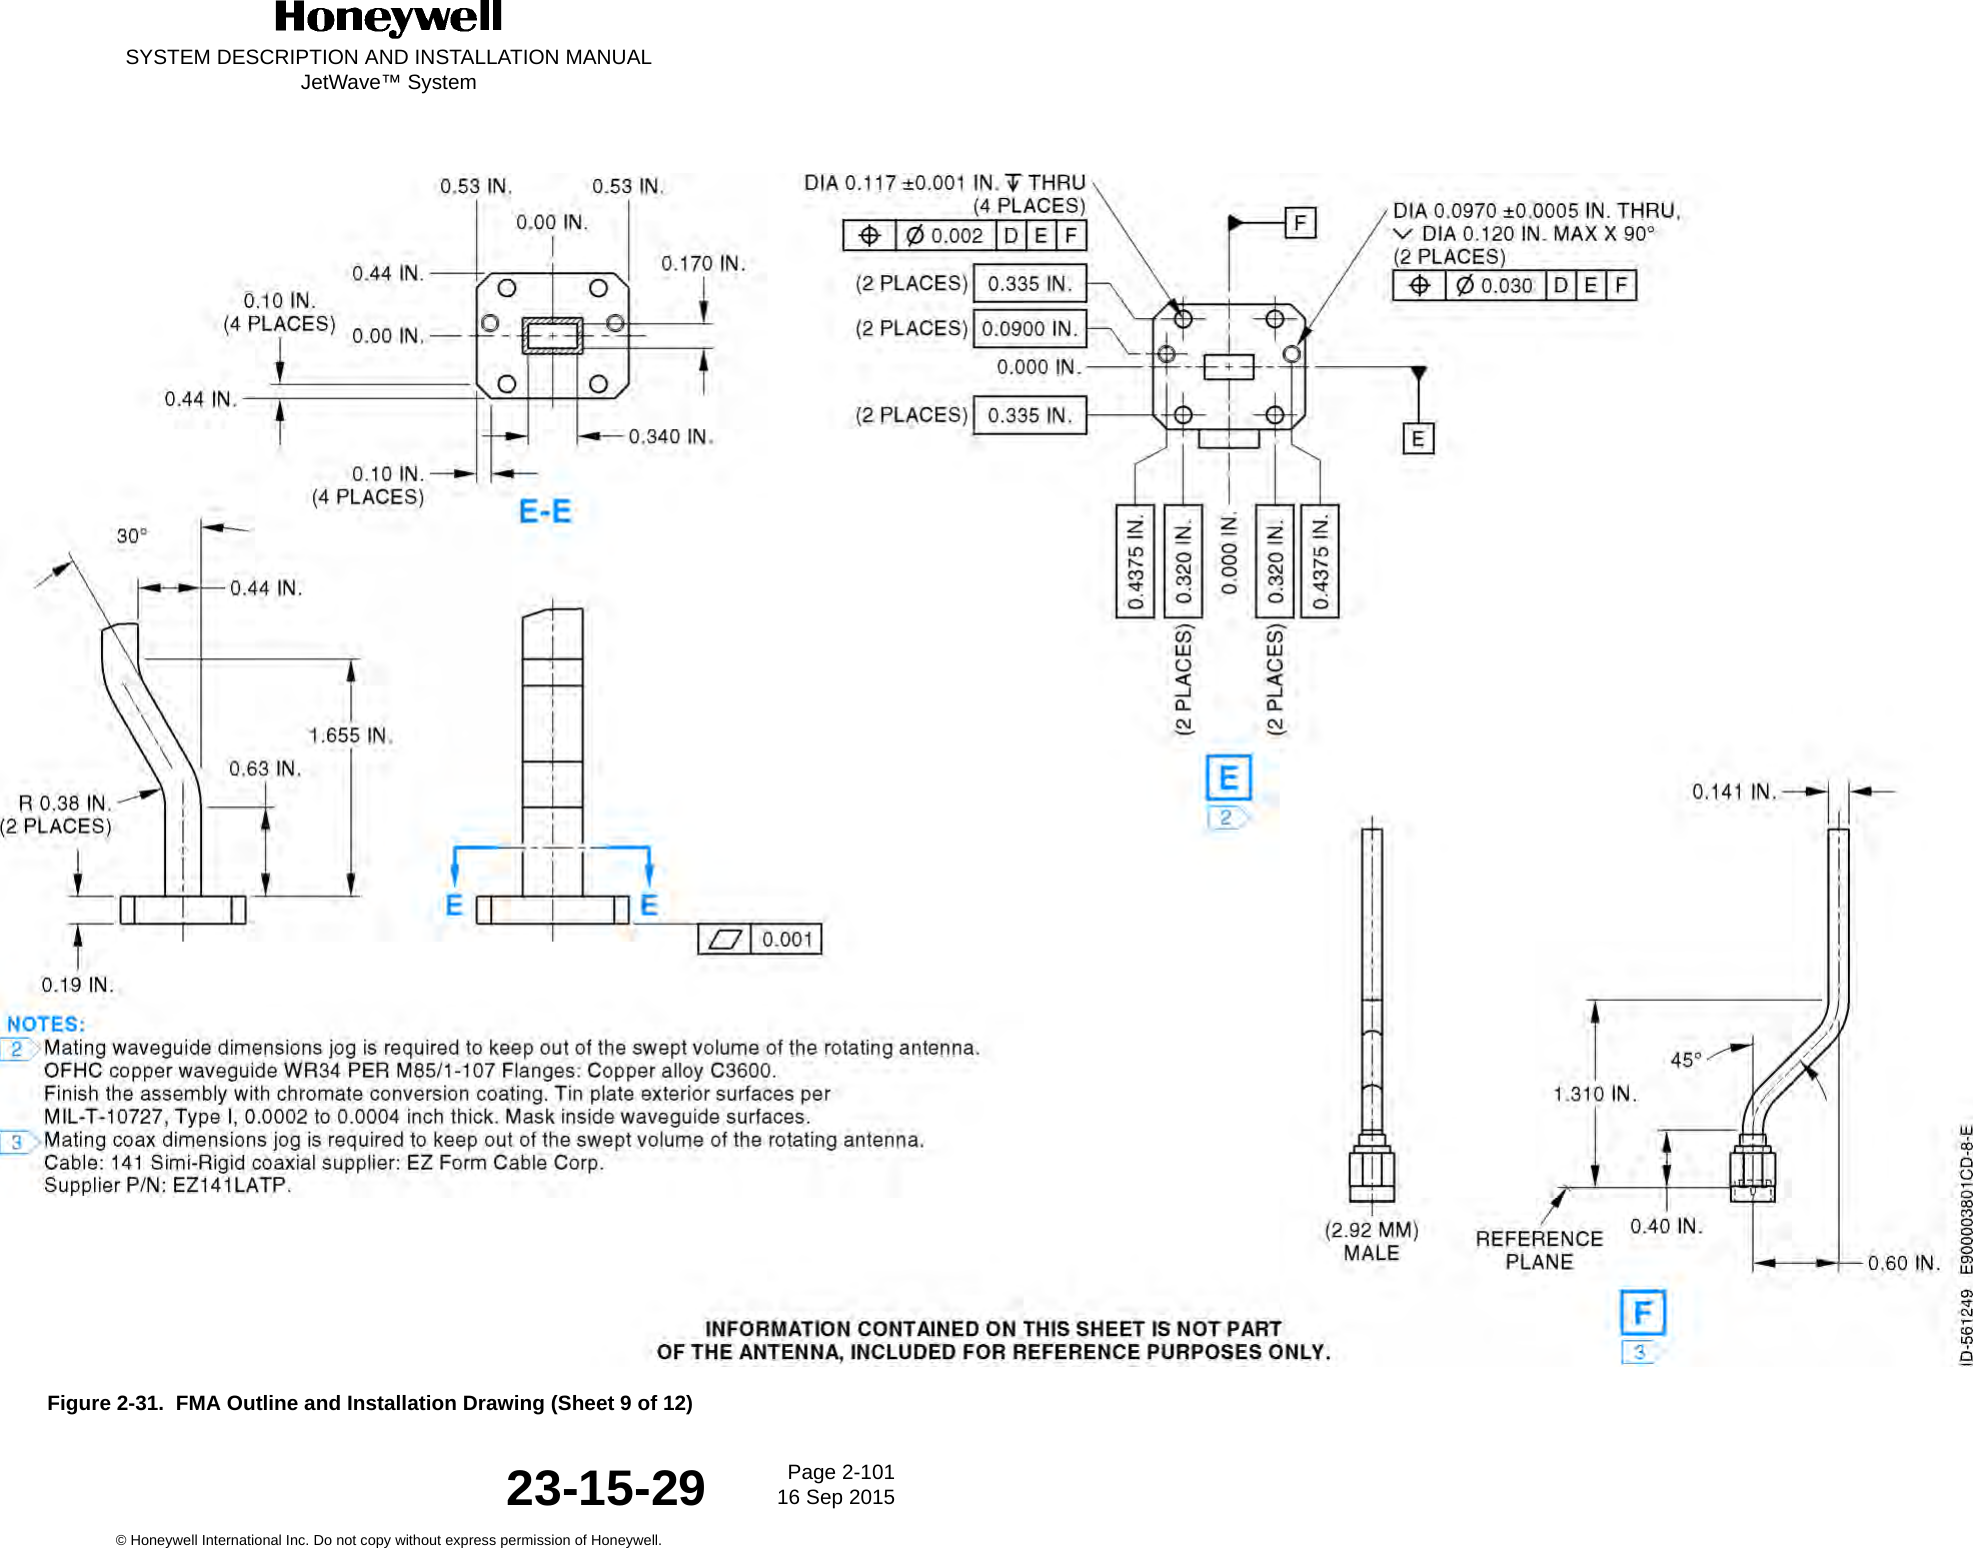 SYSTEM DESCRIPTION AND INSTALLATION MANUALJetWave™ SystemPage 2-101 16 Sep 2015© Honeywell International Inc. Do not copy without express permission of Honeywell.23-15-29Figure 2-31.  FMA Outline and Installation Drawing (Sheet 9 of 12)